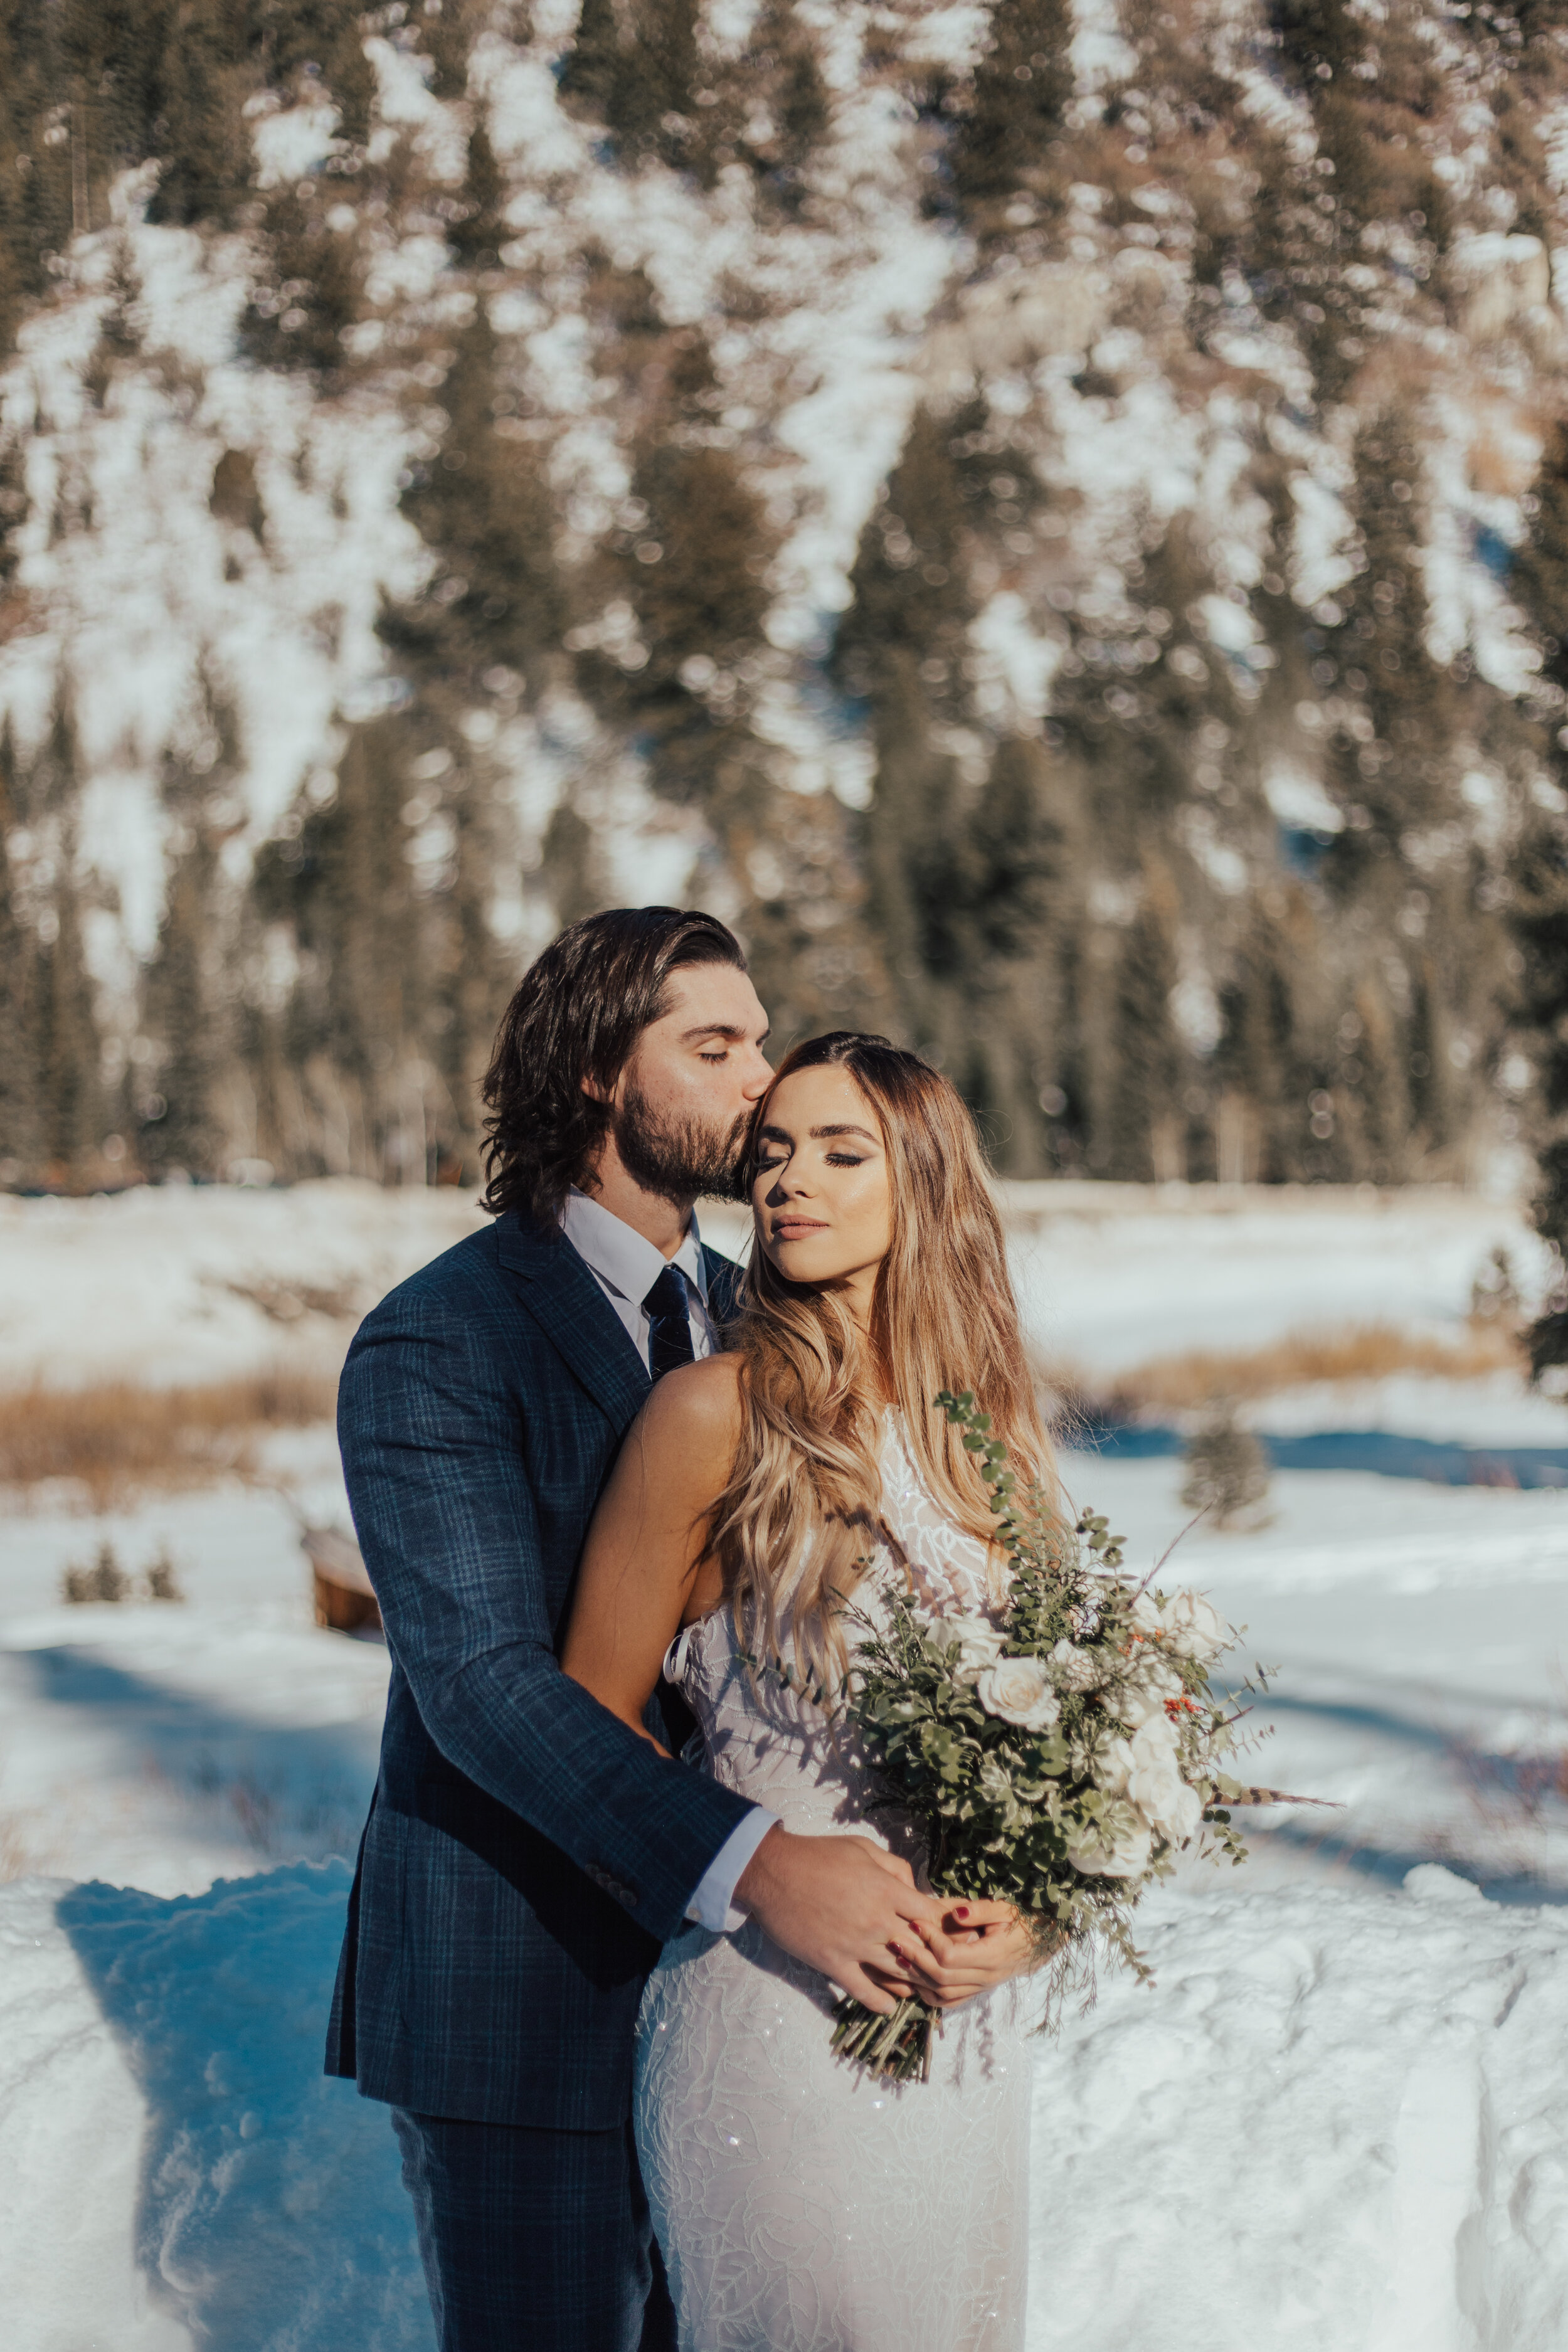 Winter mountain snowy bridals formal session bride groom sun flare pine trees wedding photos dress beard #bridals #weddingphotos #brideandgroom #utahphotographer #weddingphotographer #winterwedding